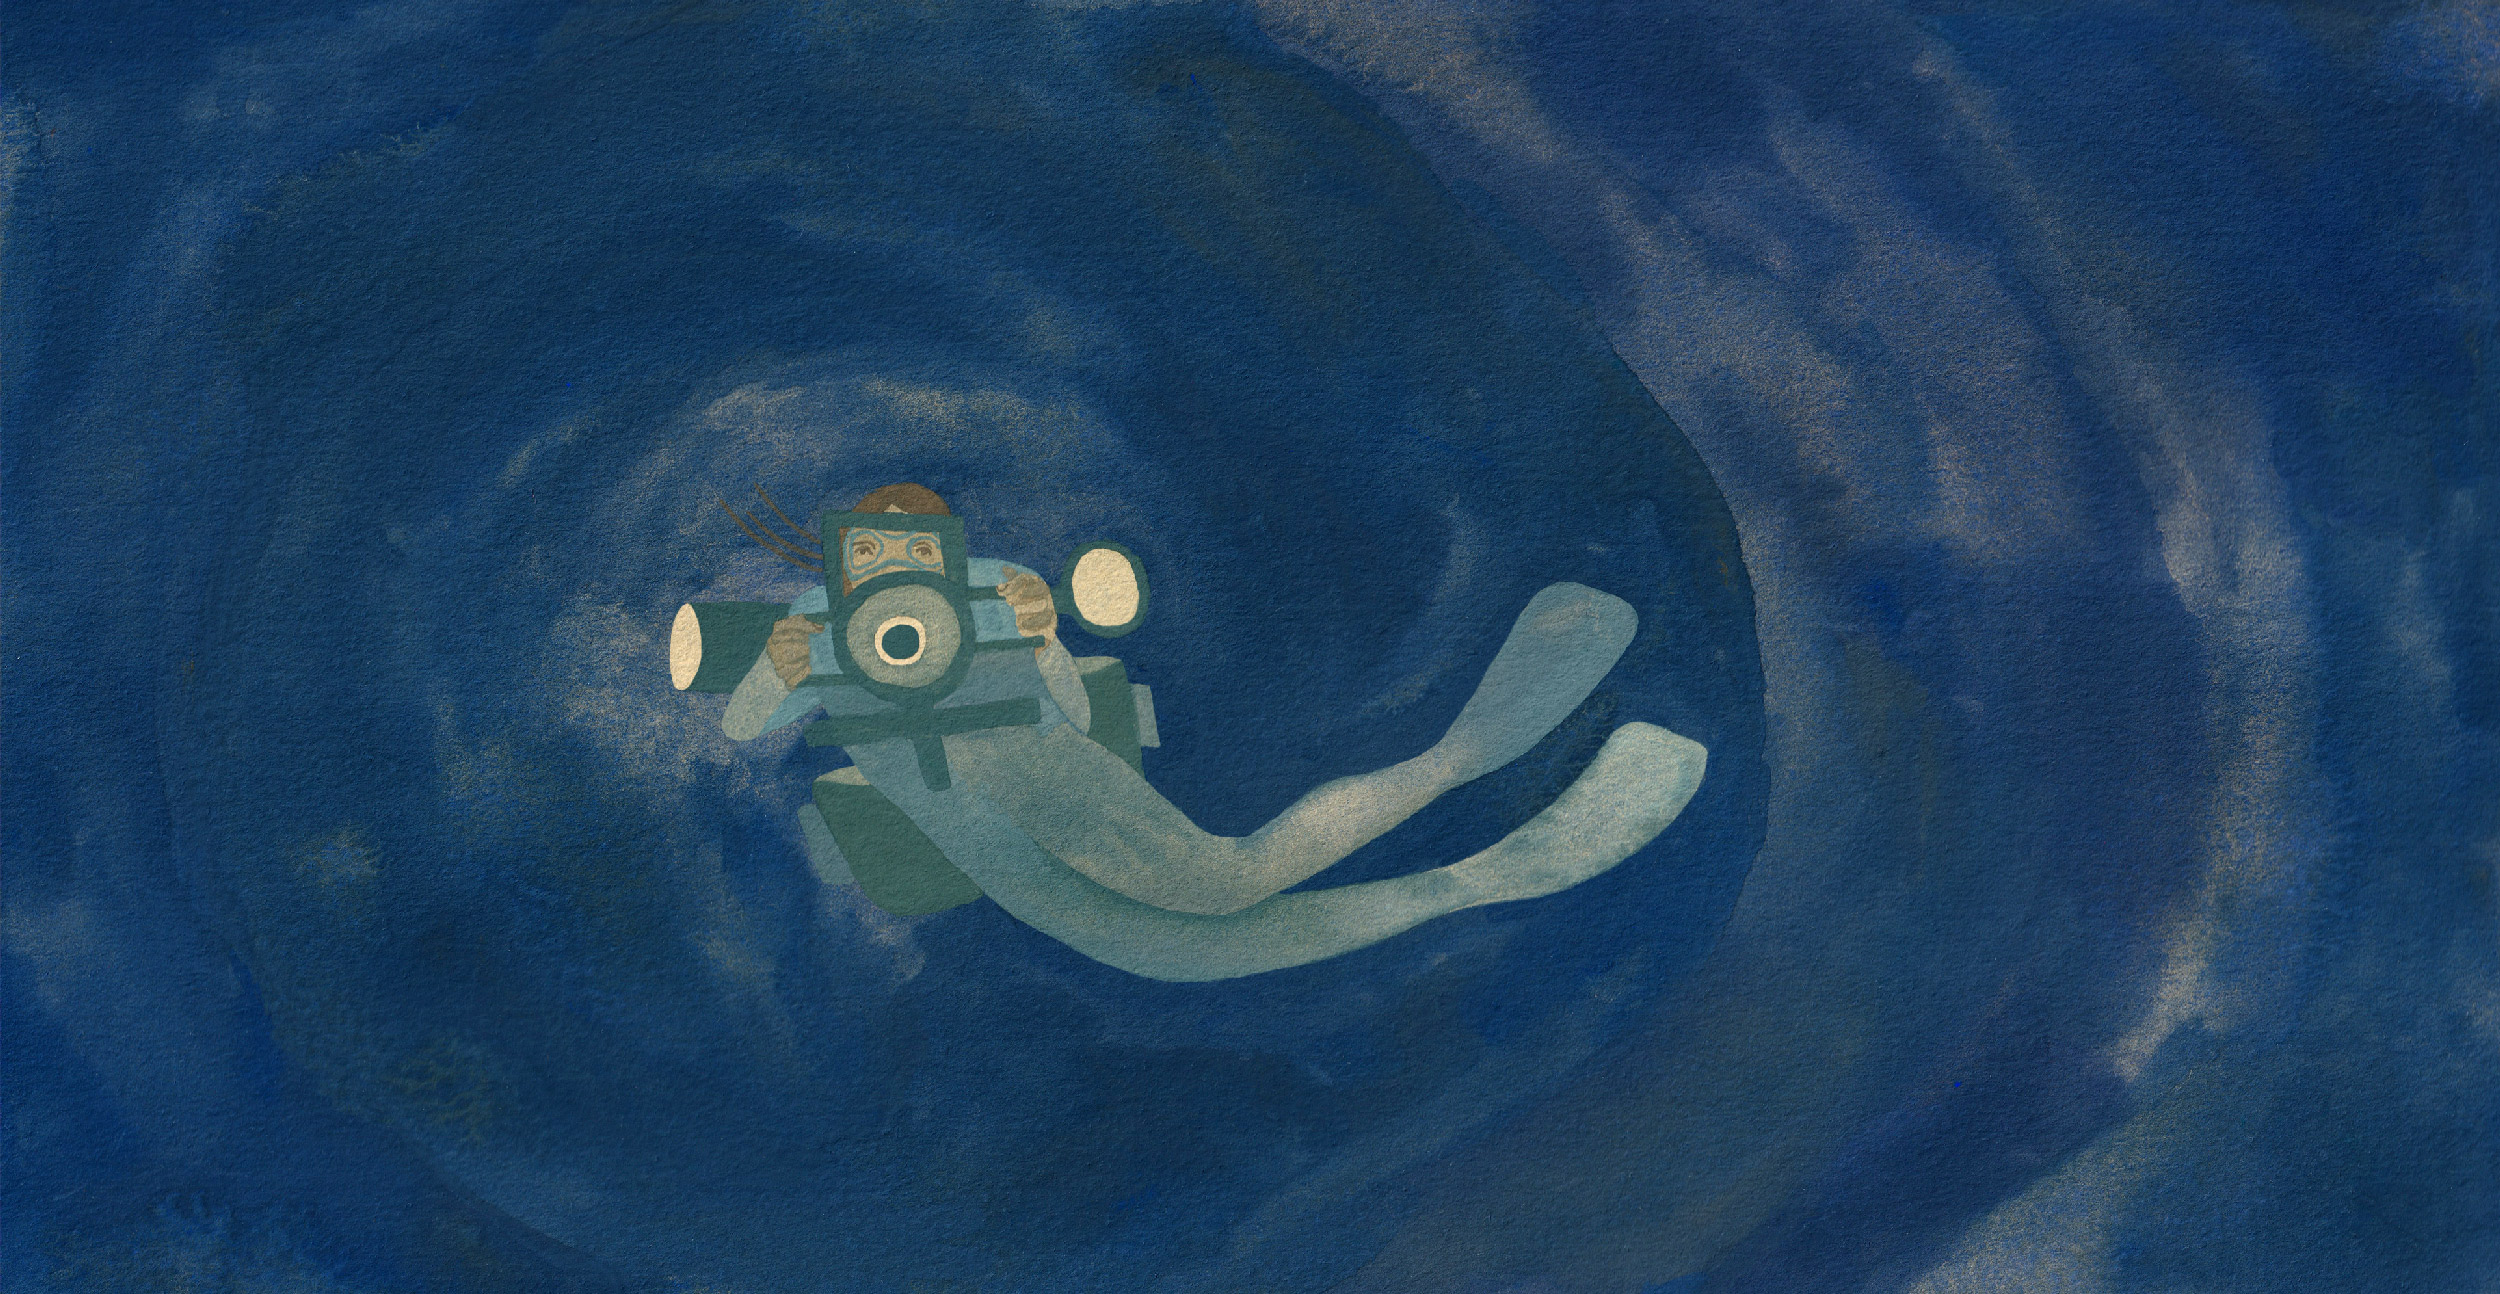 Painting of diver with camera and lighting equipment in dark blue water. Illustration by Eryn Lougheed for The Narwhal's investigation into allegations against Pacific Wild